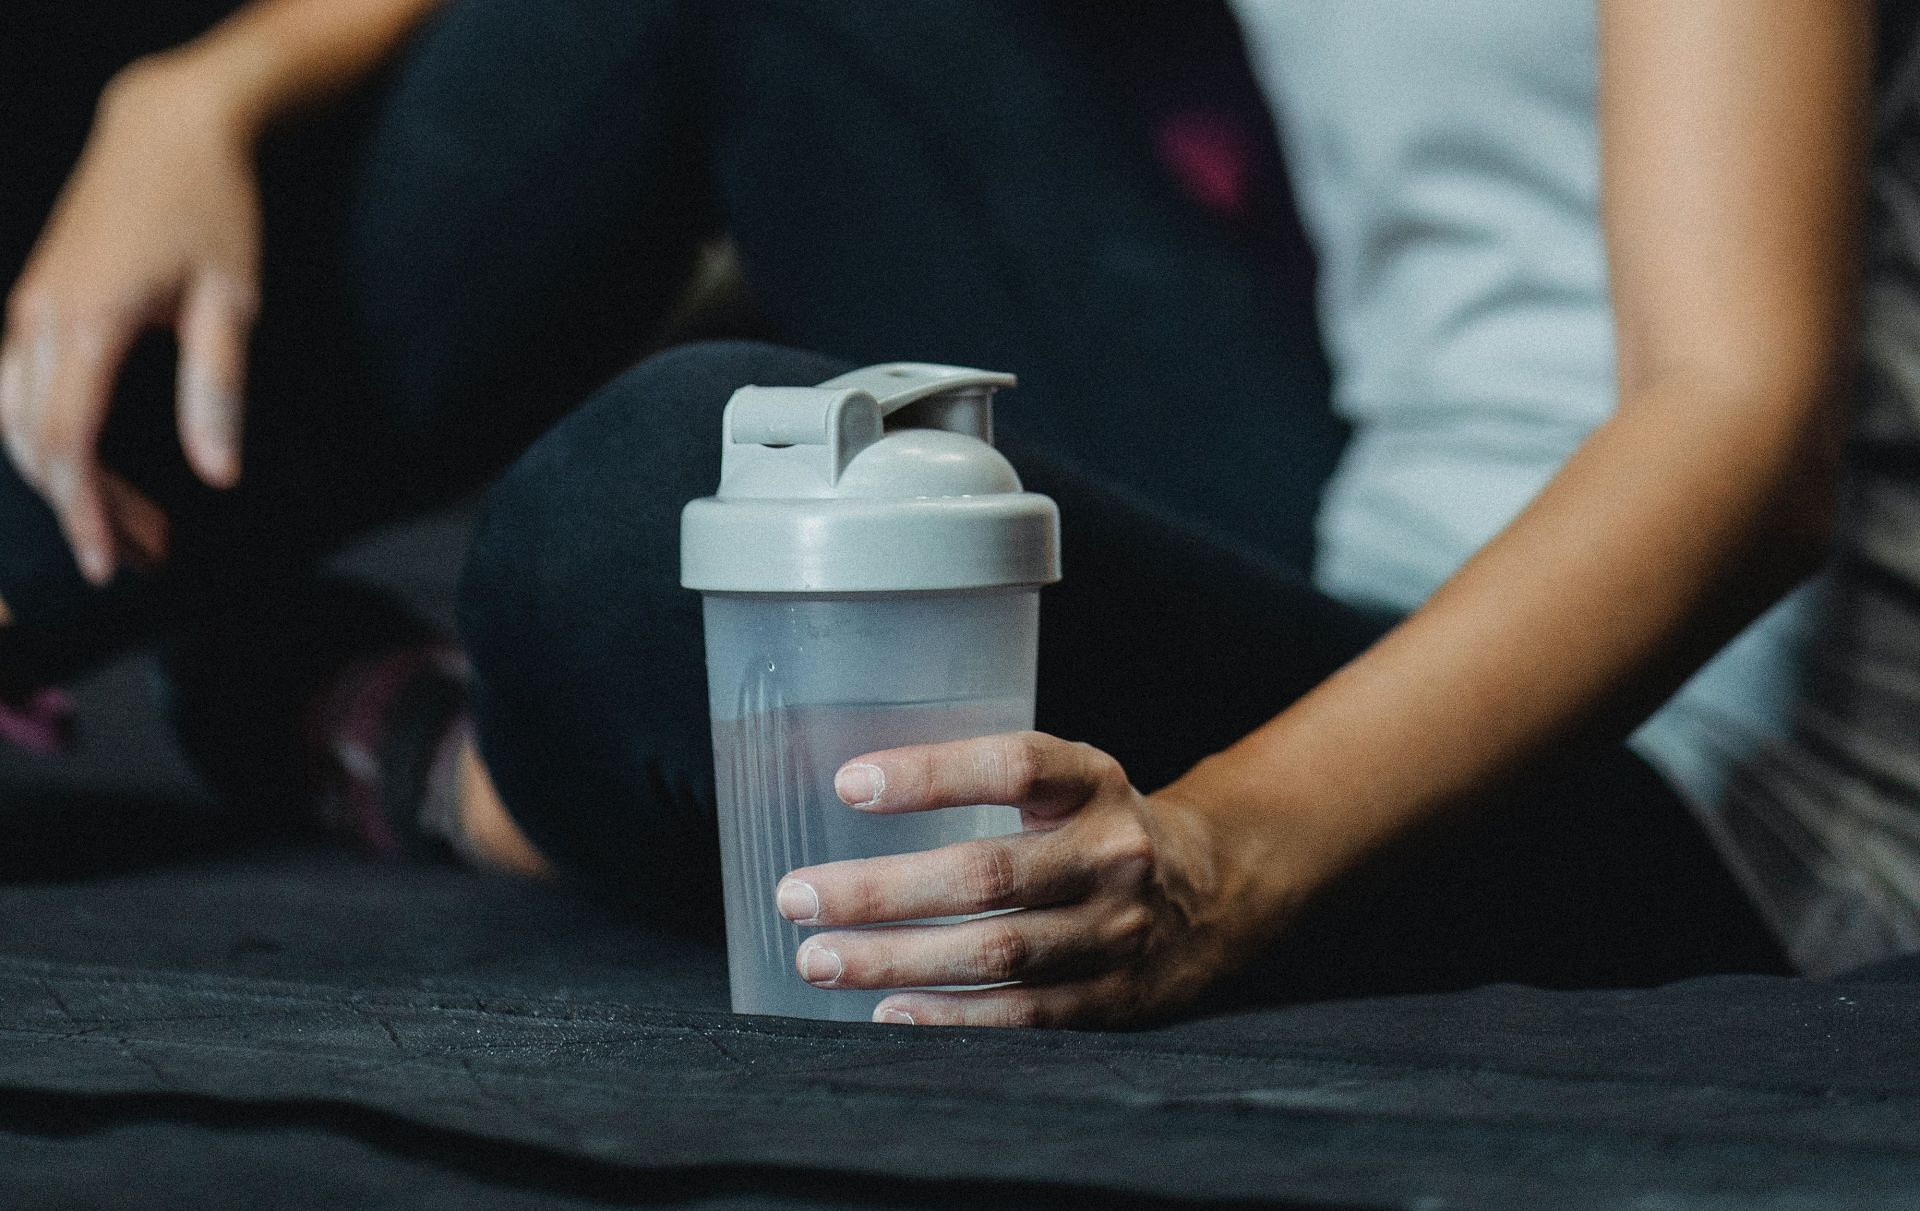 Creatine supplement increases creatine concentration in muscle tissue. (Image via Pexels/ Allan Mas)